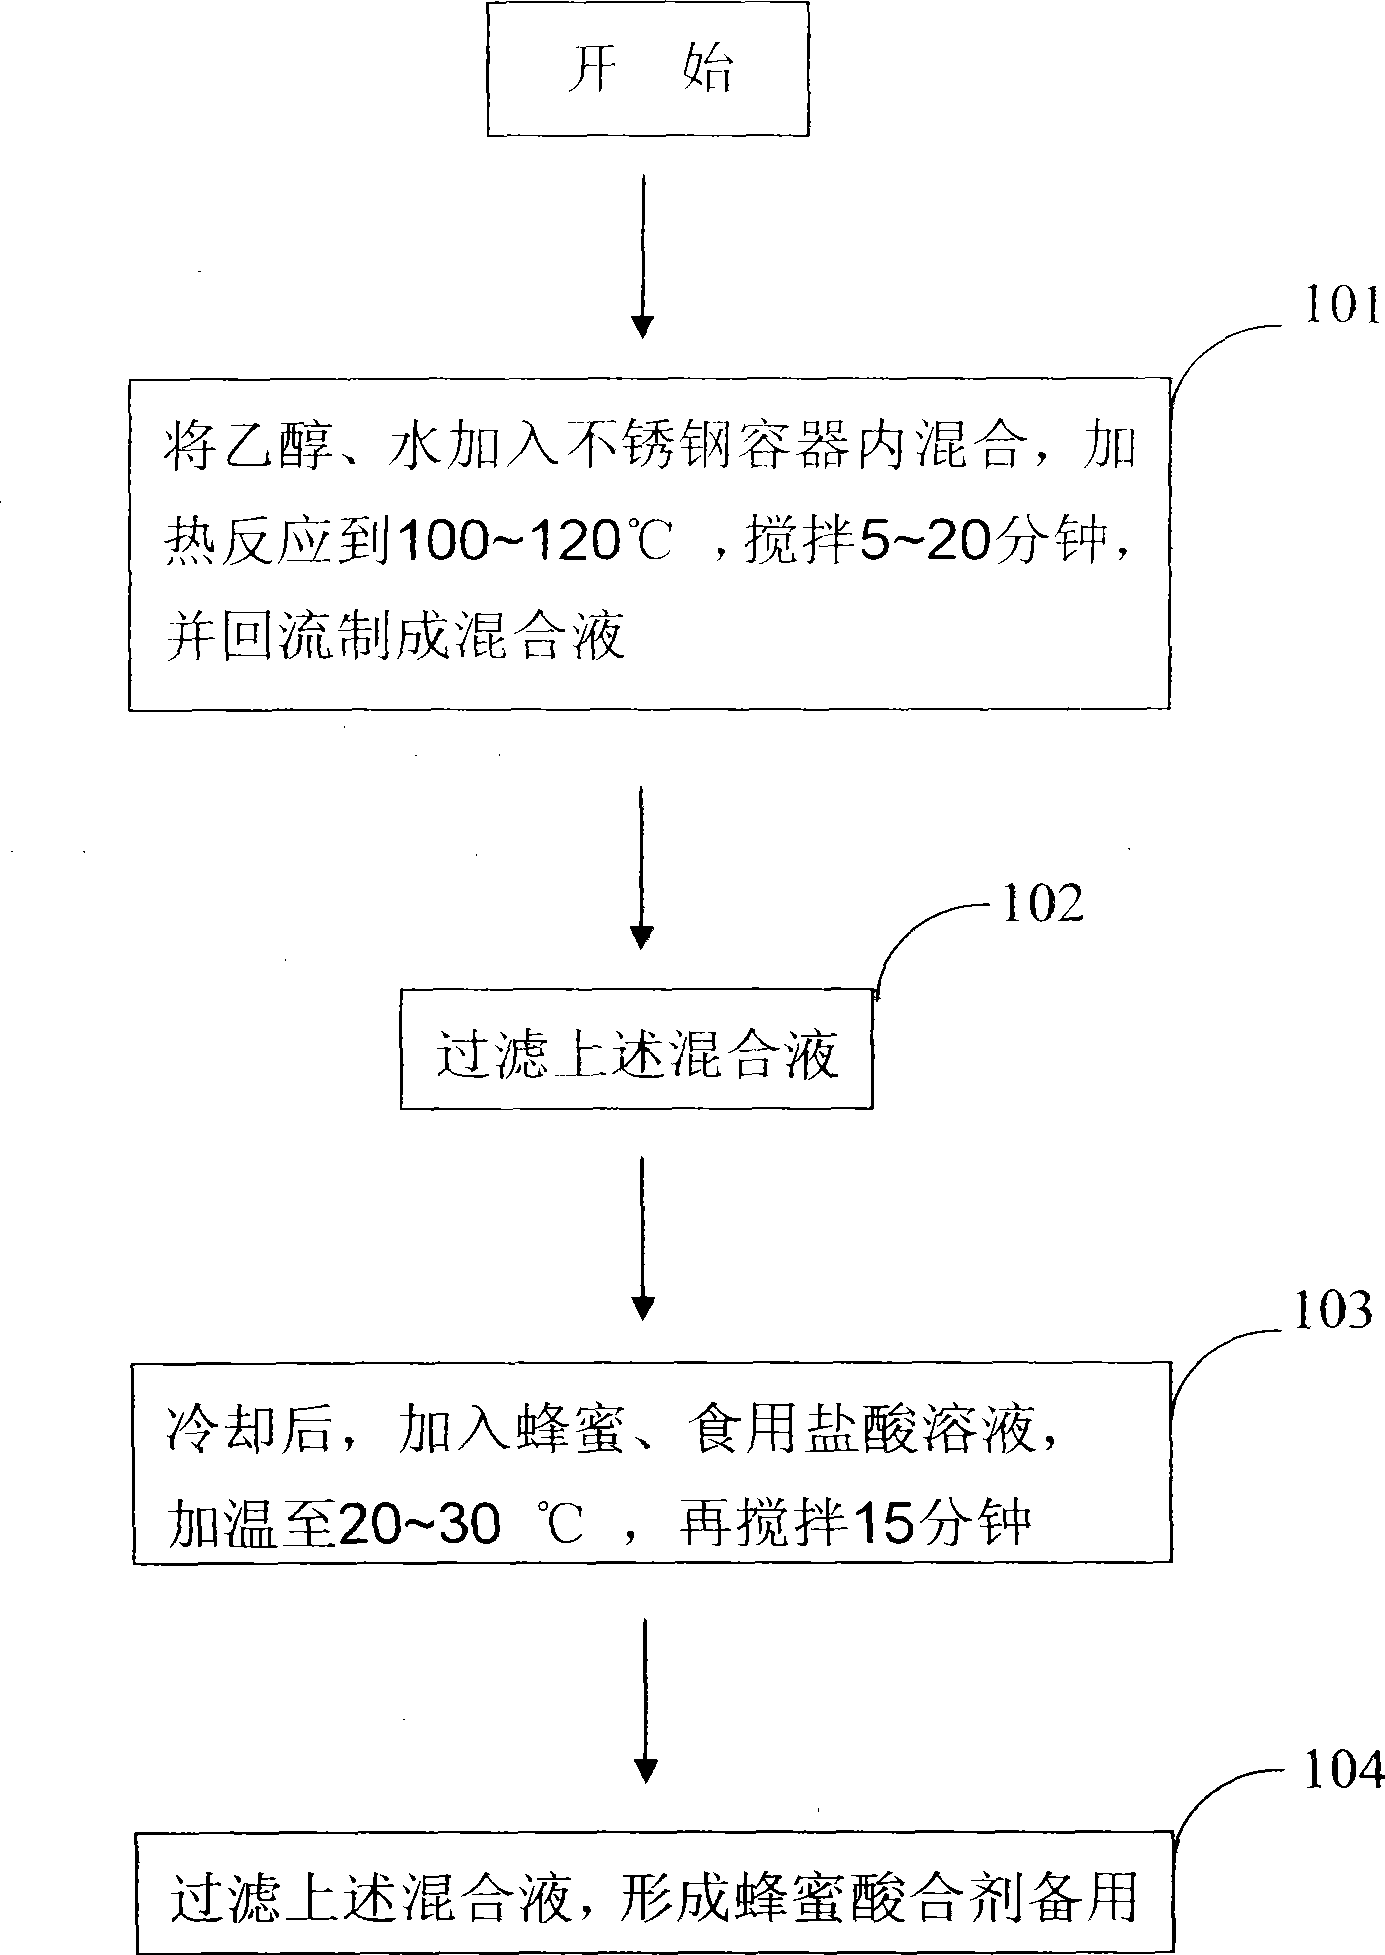 Honey acid, preparation and application thereof